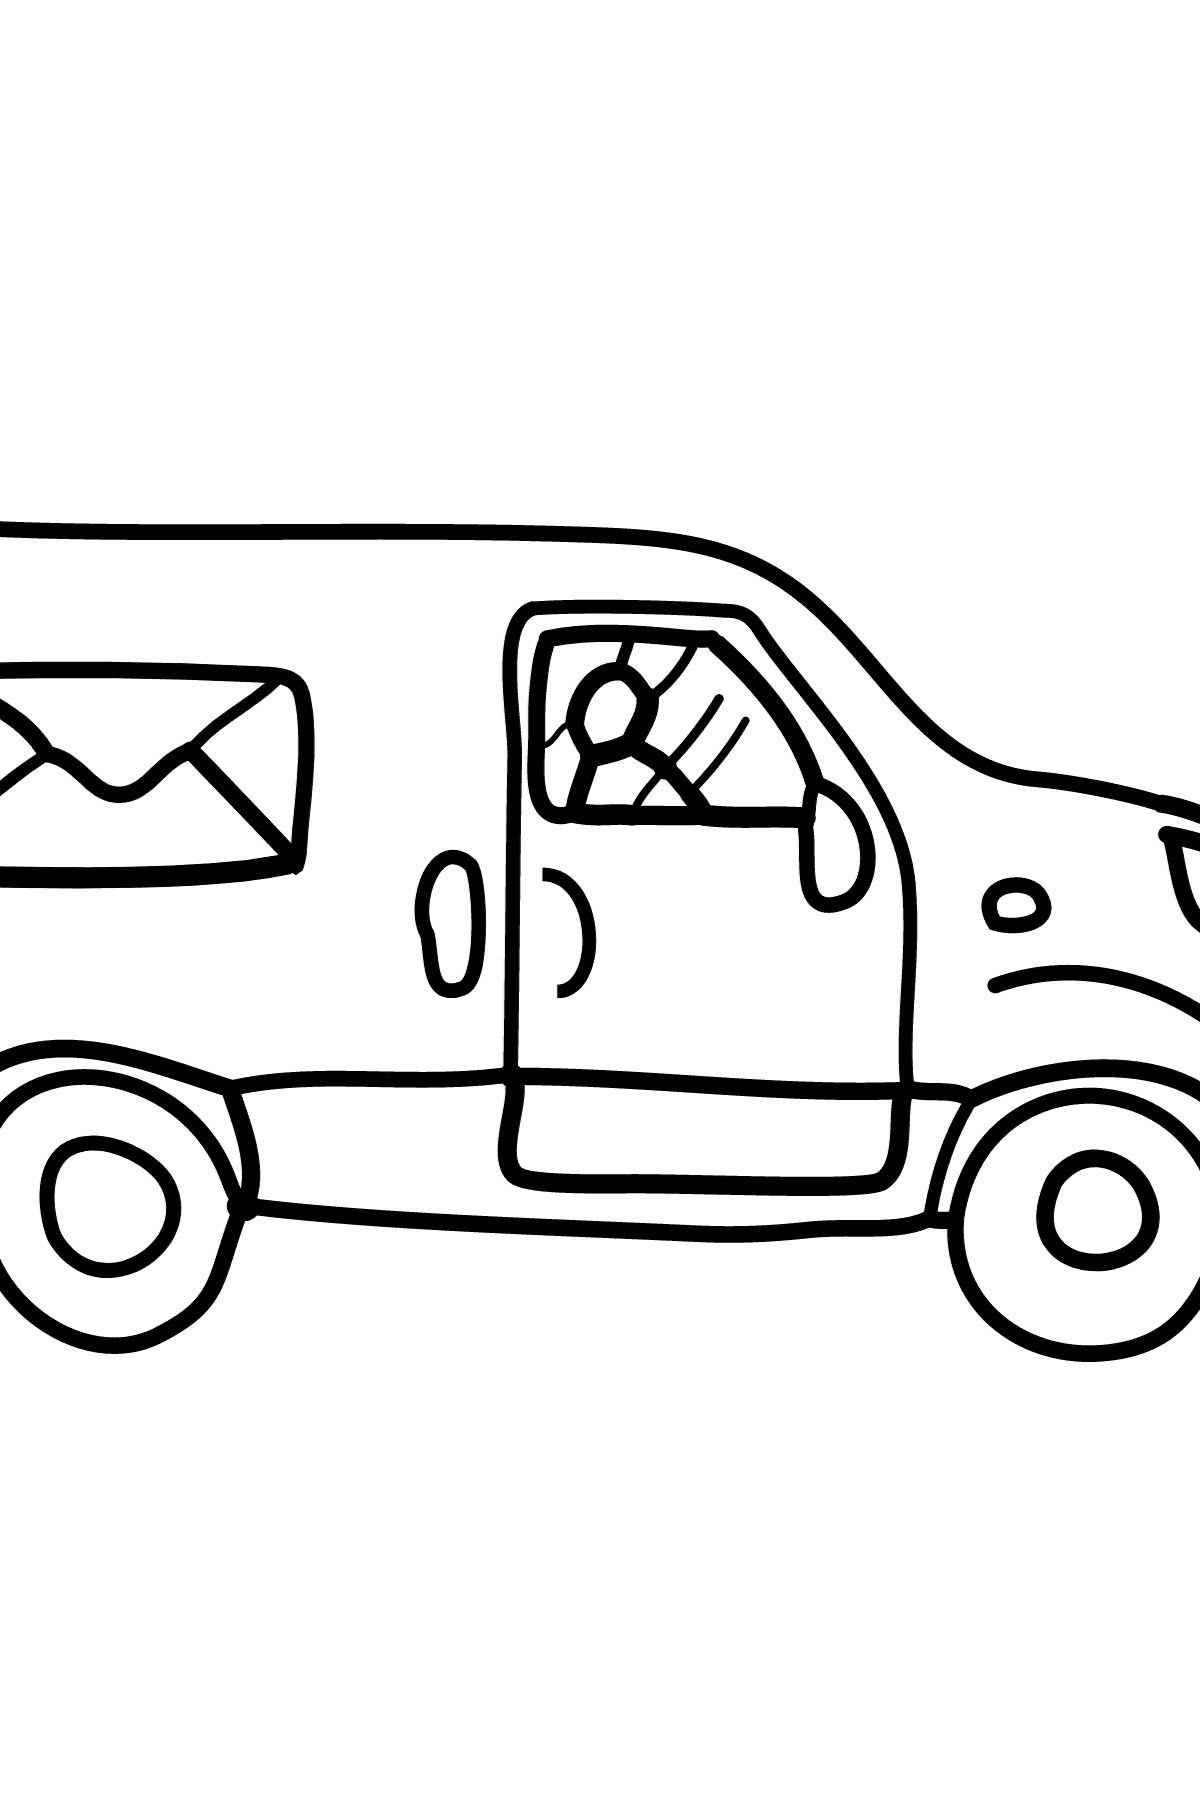 Coloring Page - A Car is Carrying Mail - Coloring Pages for Children